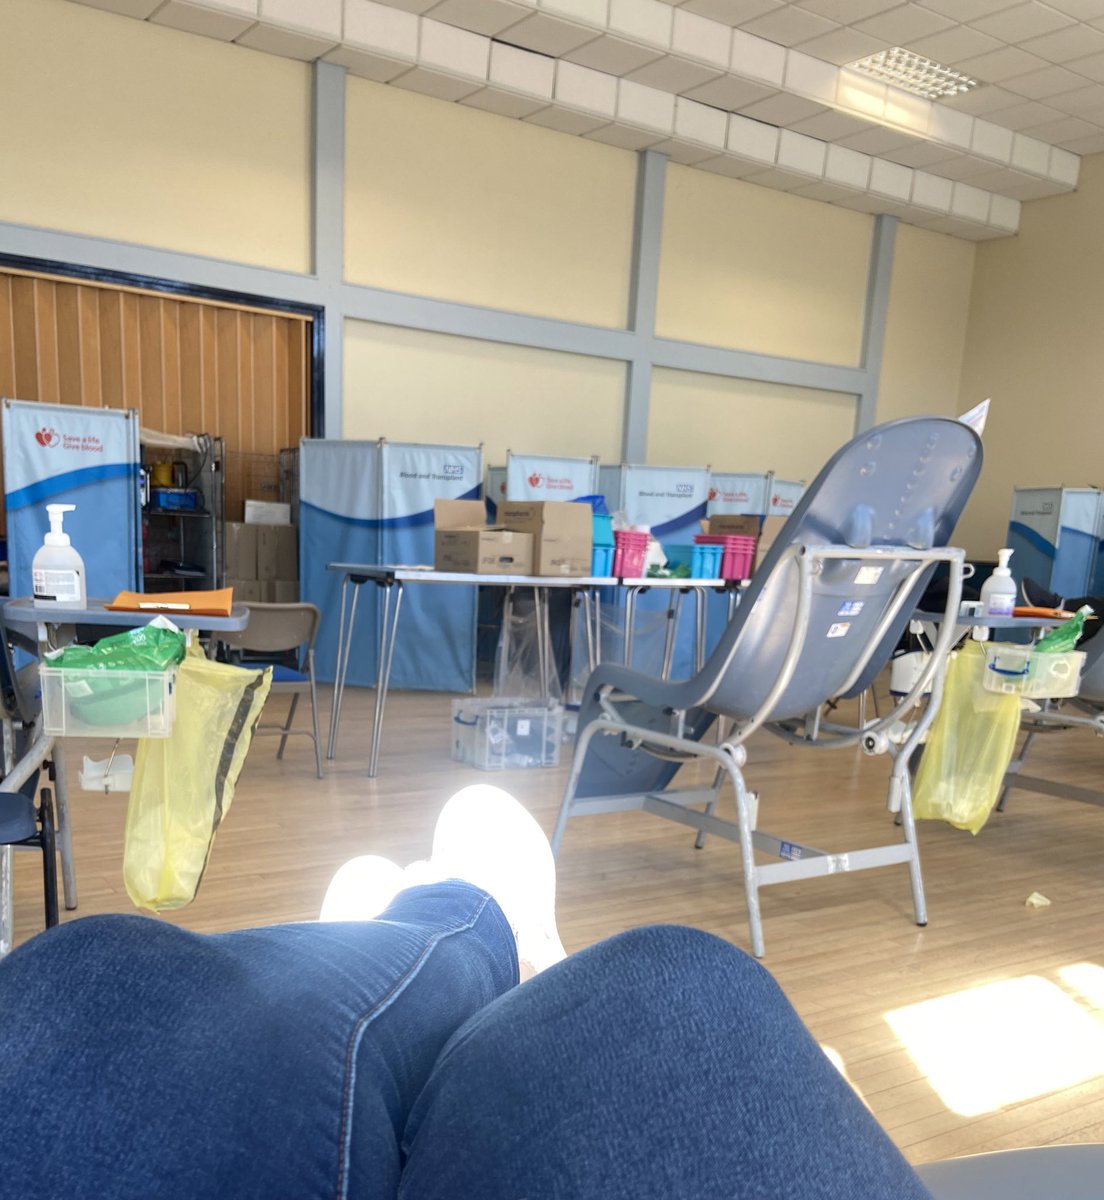 ‘ A little scratch’ that’s all it takes to save a life! Shout out to the #hartlepool team at @GiveBloodNHS. In and out in 25 minutes! Booked in for August - anyone coming to join me?